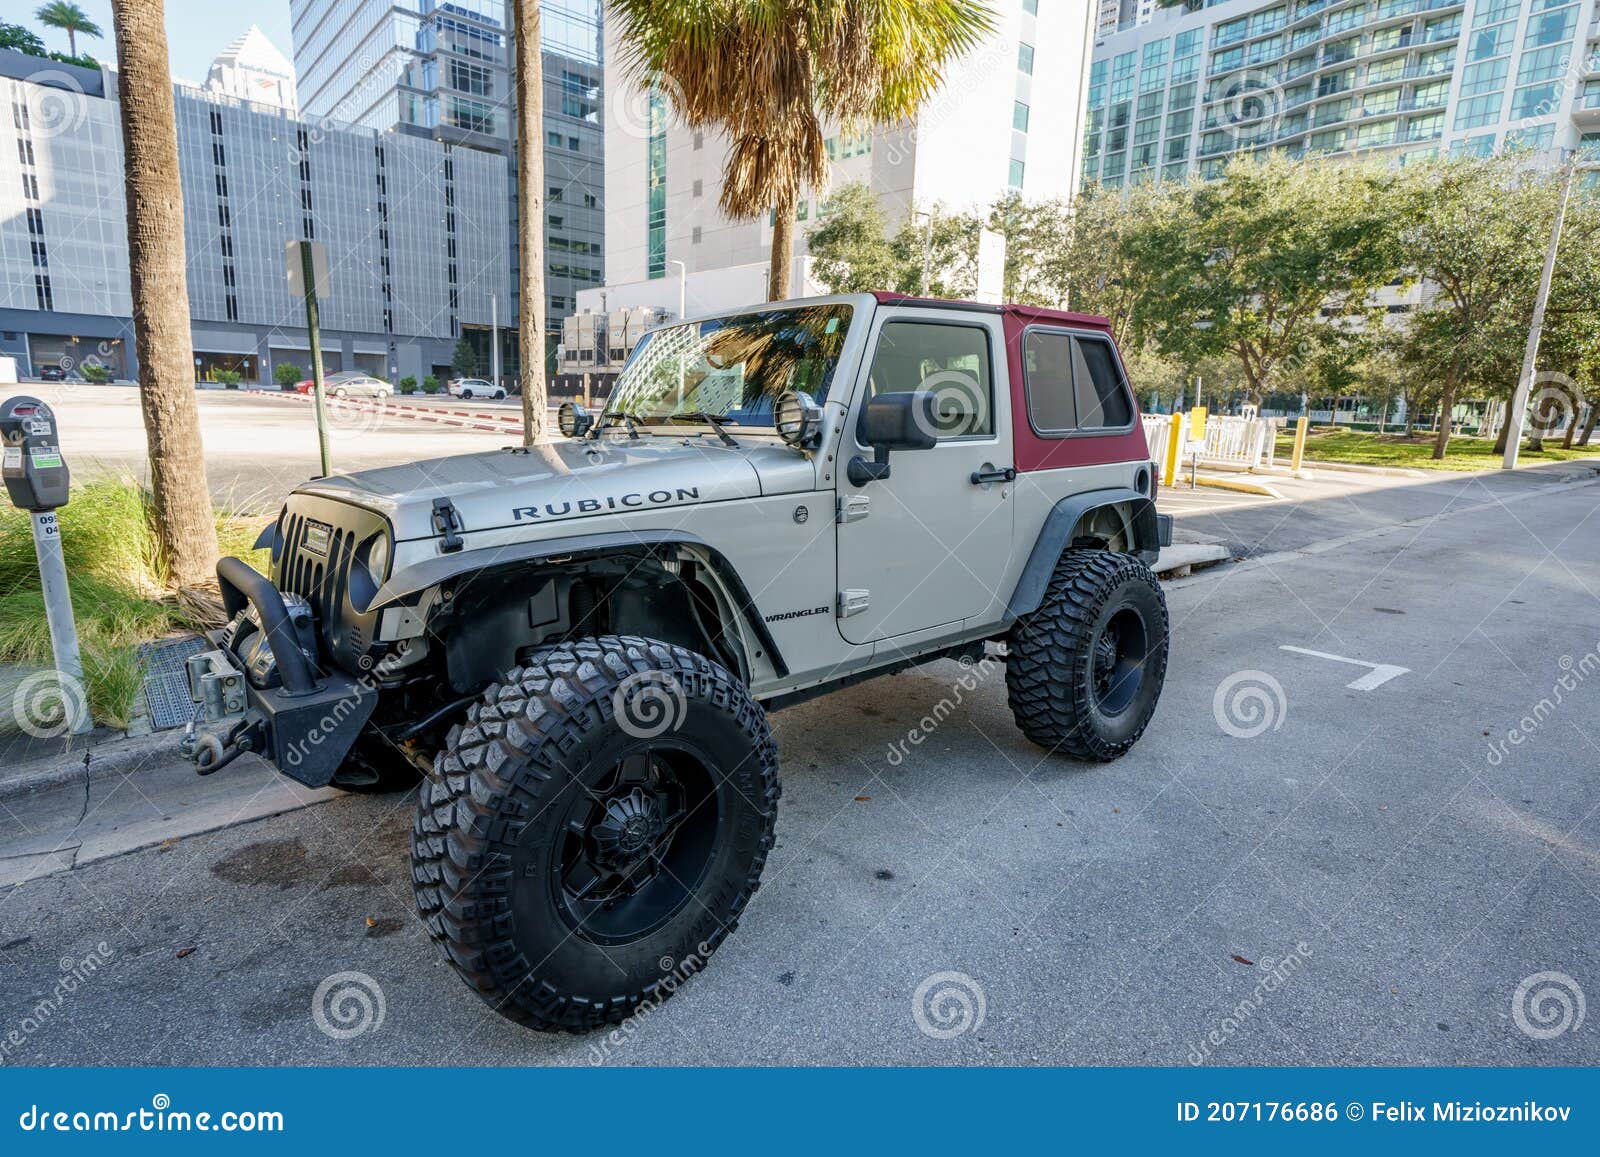 Two Door Jeep Wrangler Rubicon Lifted with Oversized Tires for Trail Riding  4x4 Editorial Photo - Image of riding, wrangler: 207176686